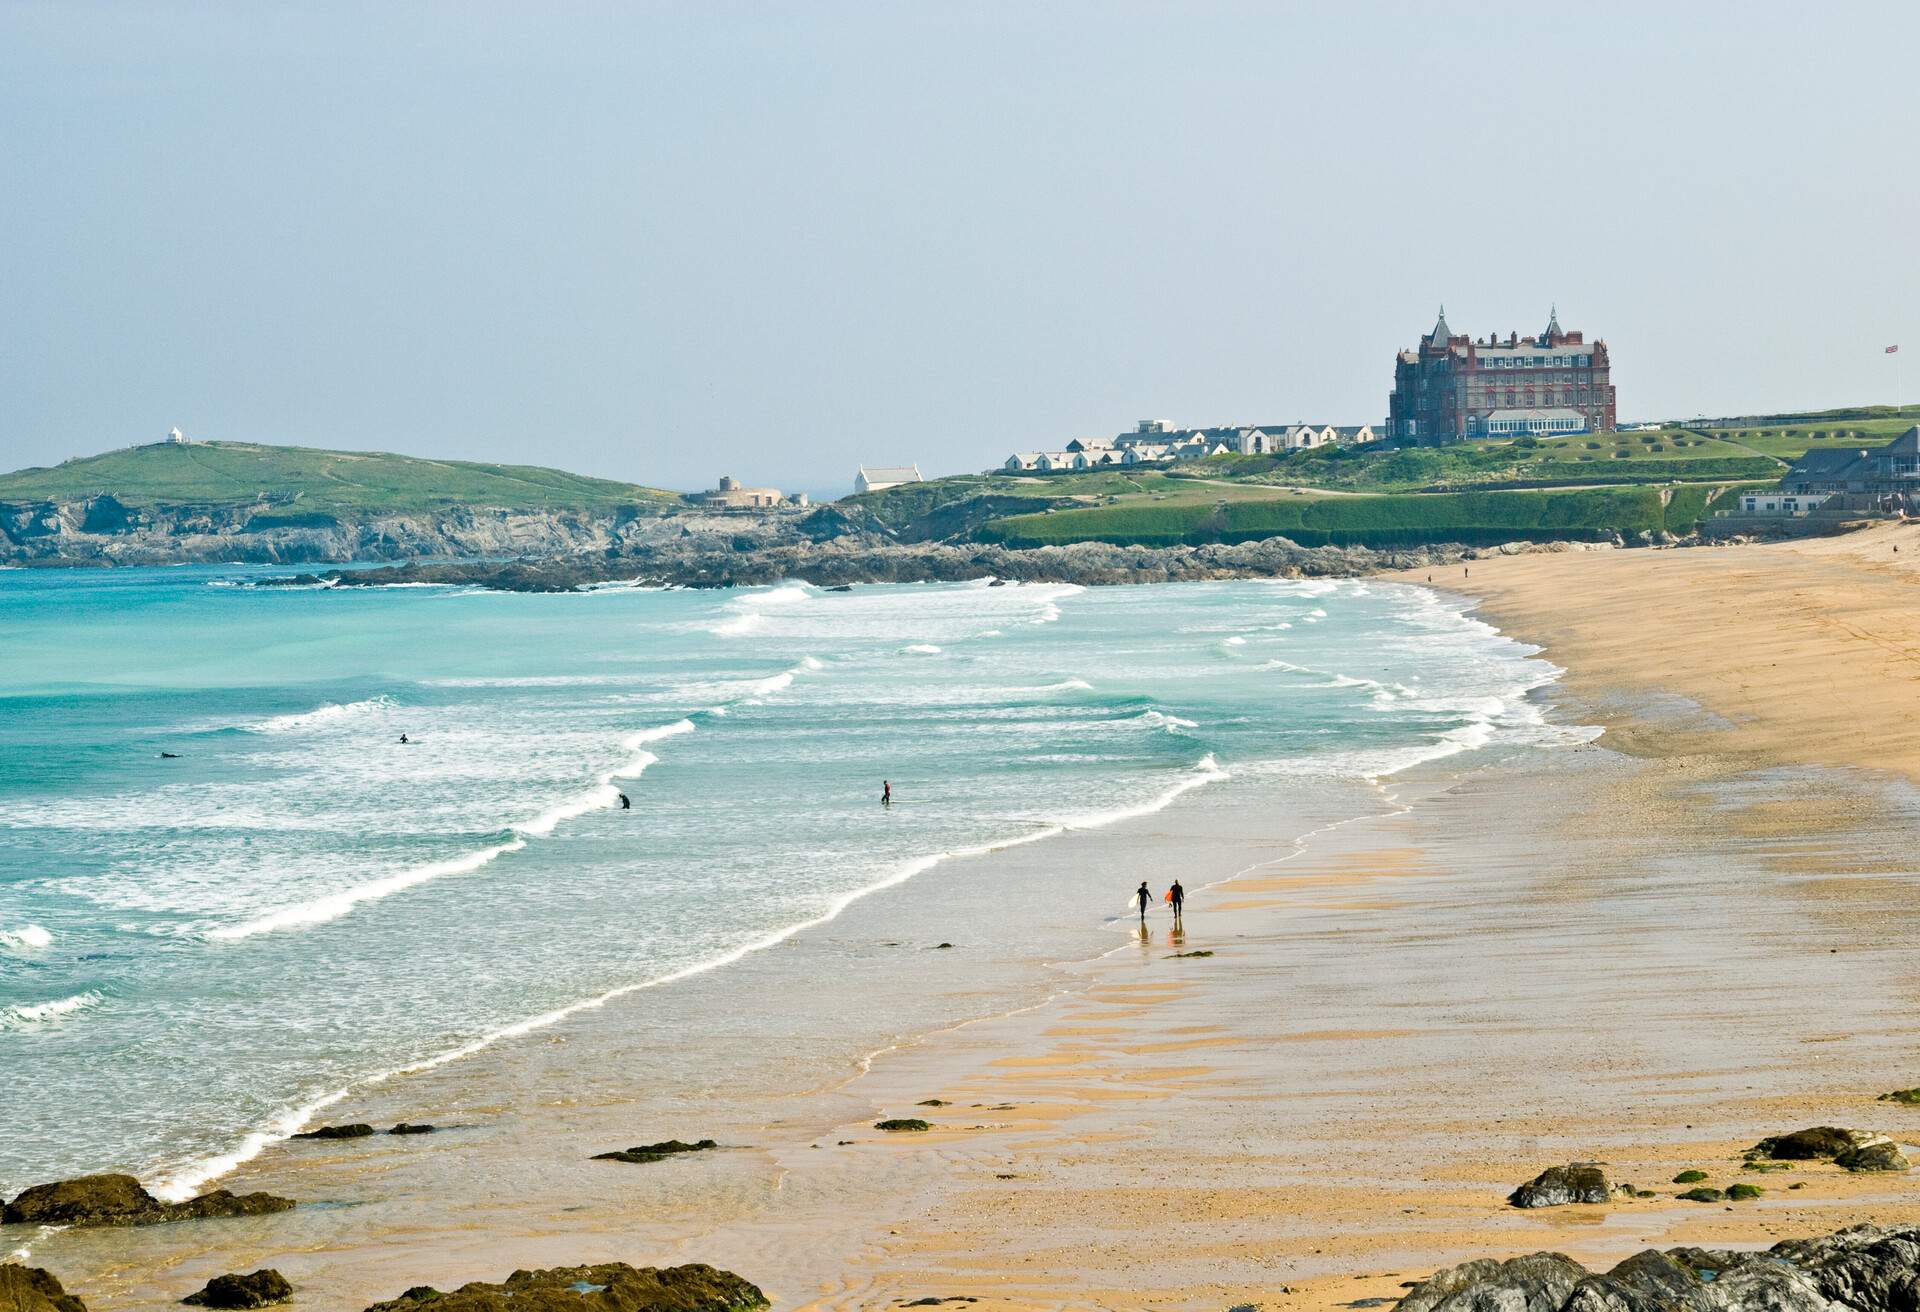 The most famous surf beach in the UK.